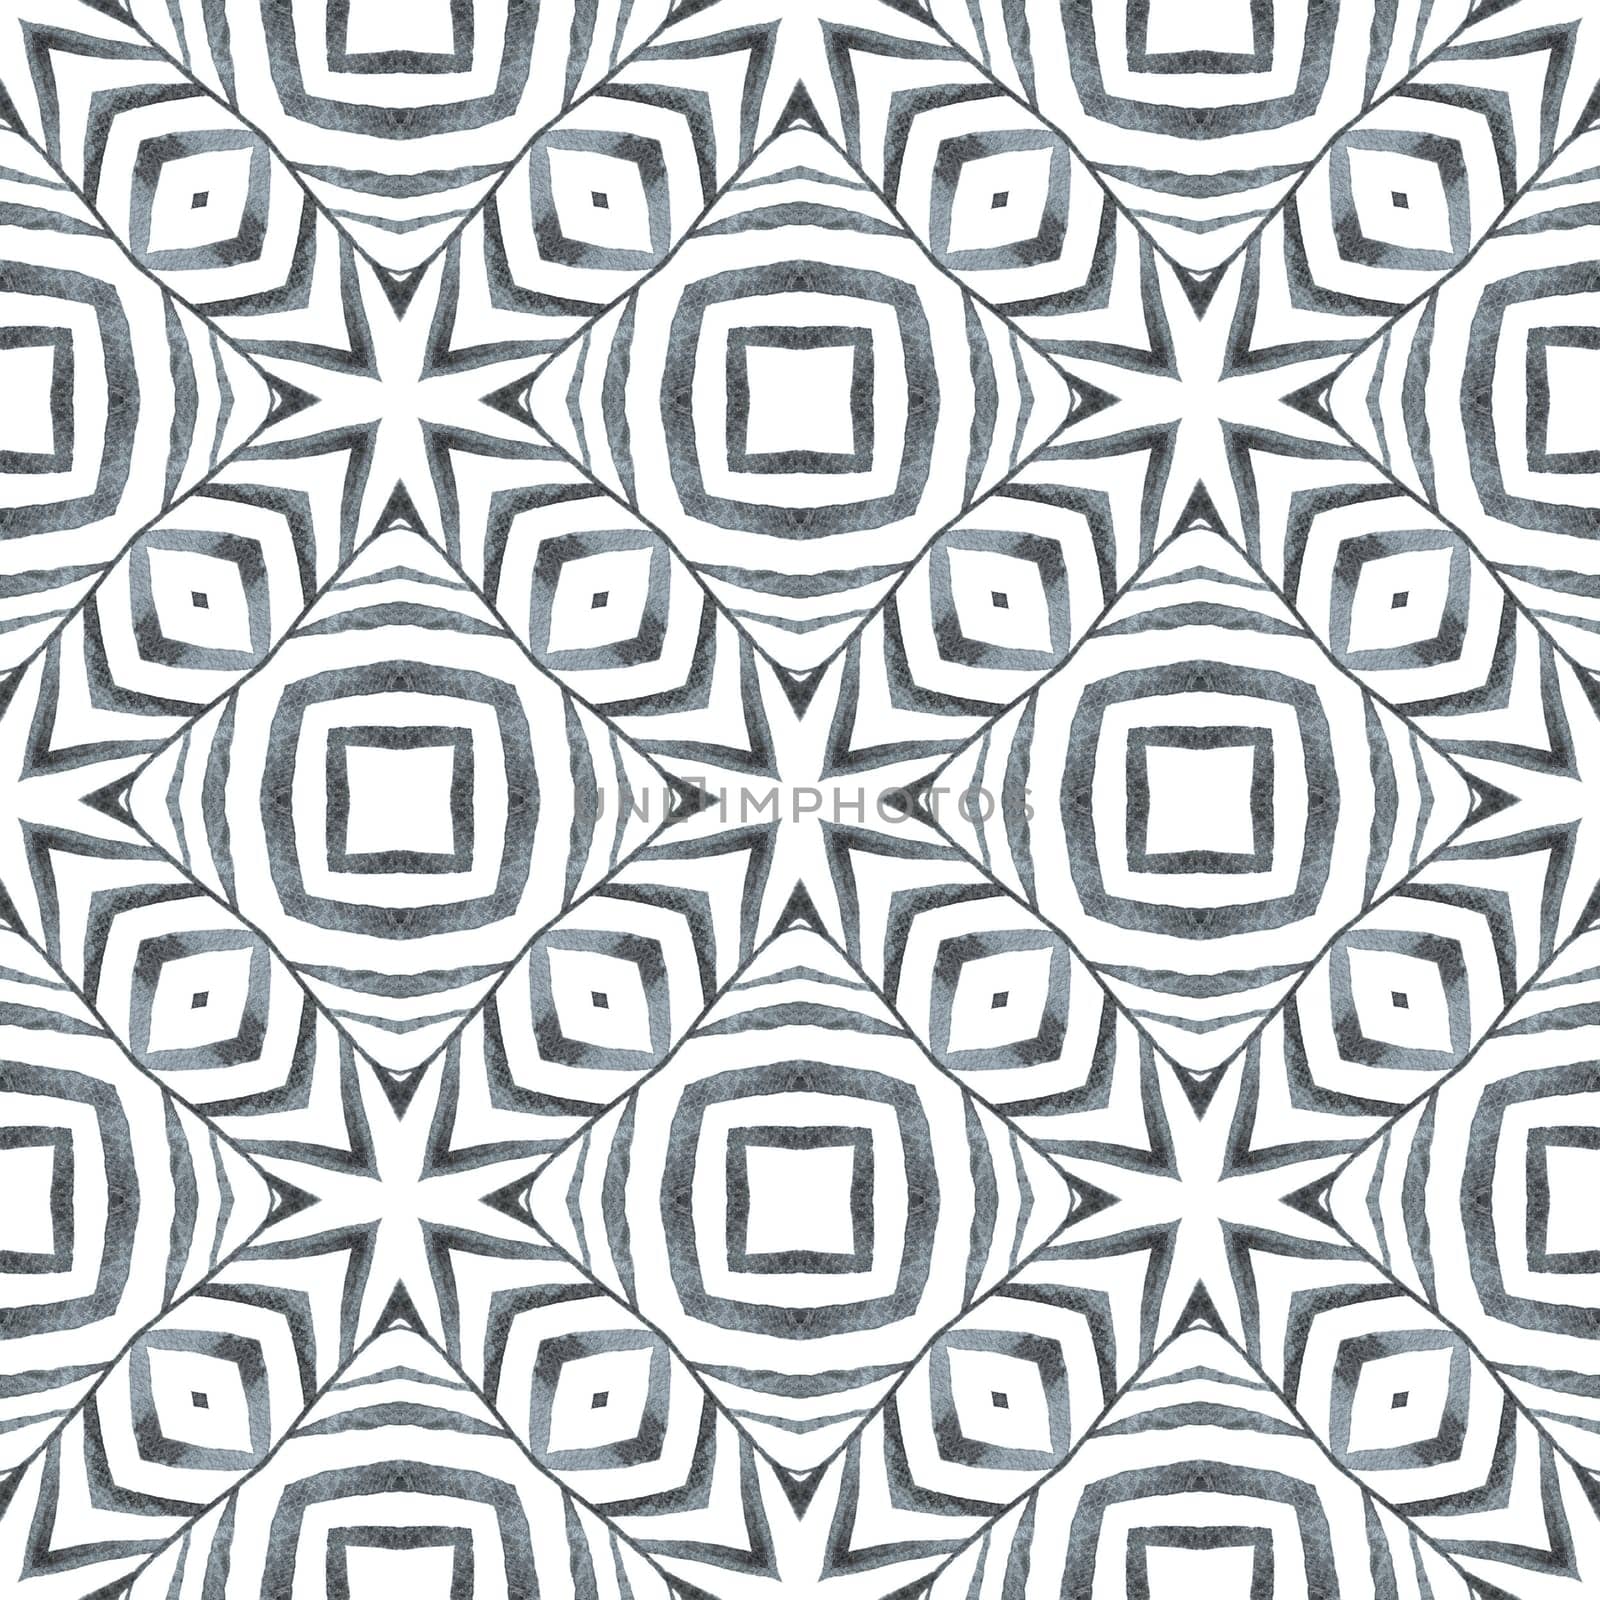 Textile ready enchanting print, swimwear fabric, wallpaper, wrapping. Black and white exceptional boho chic summer design. Summer exotic seamless border. Exotic seamless pattern.